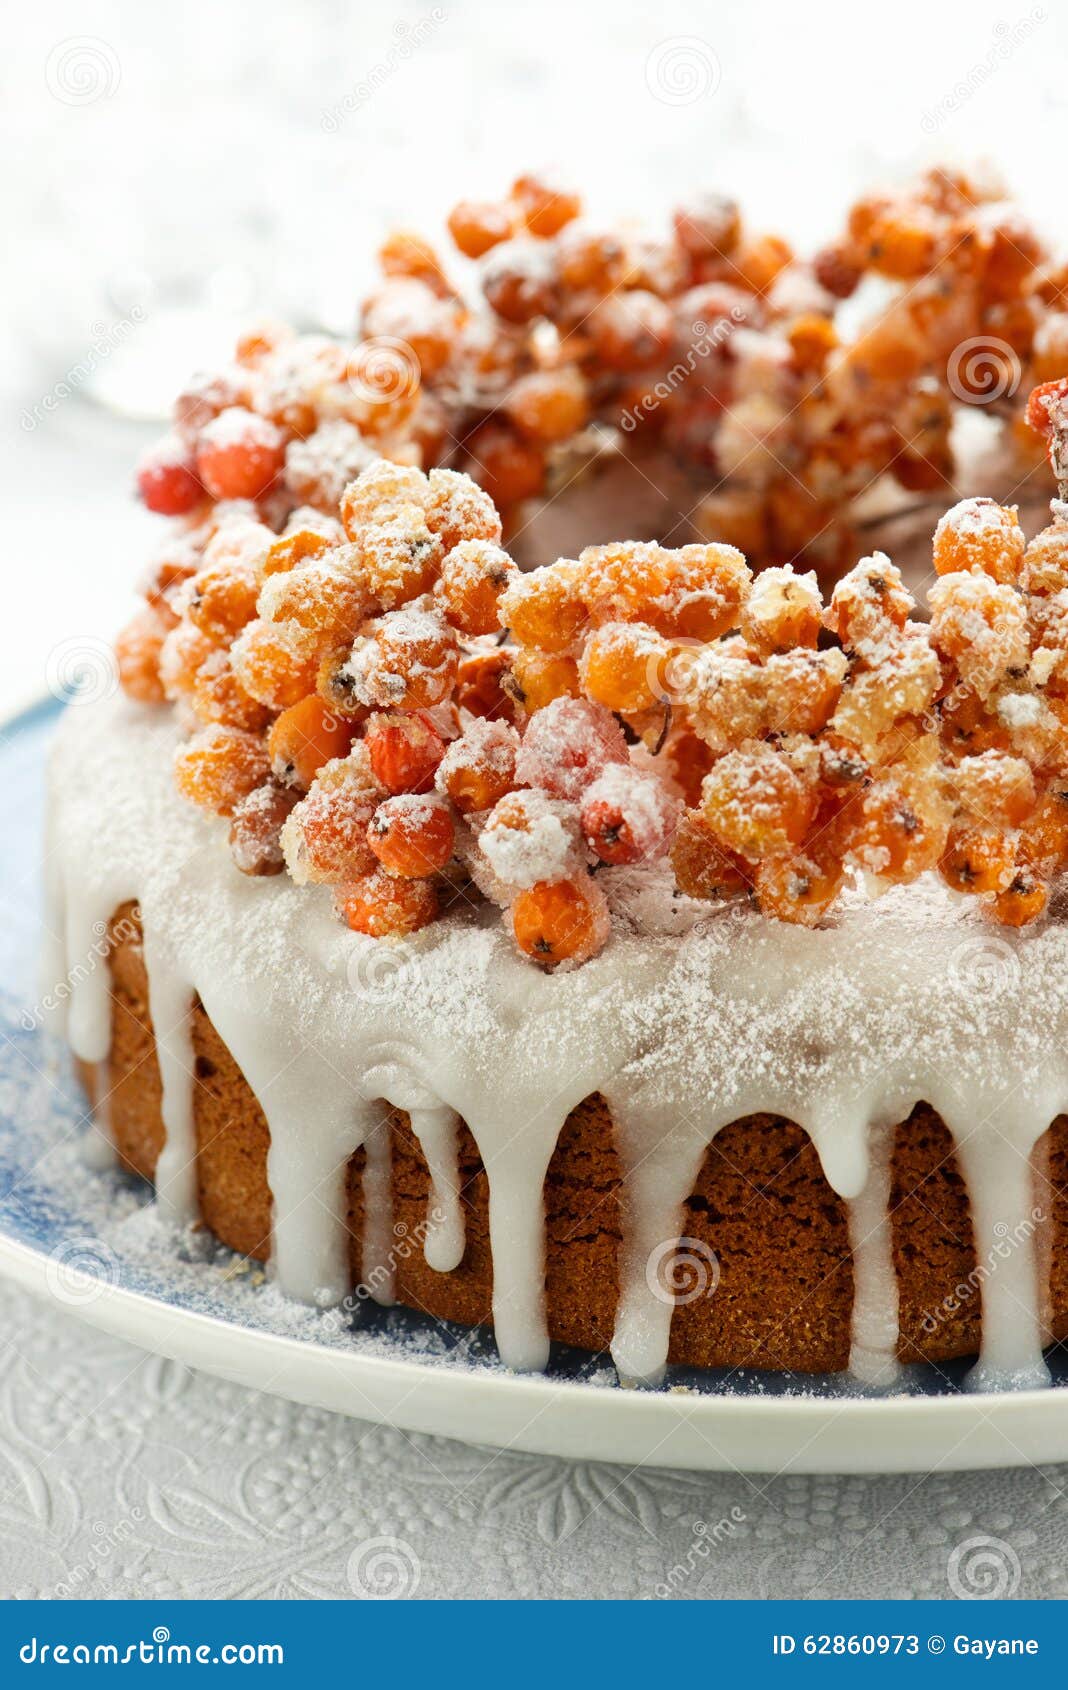 Christmas Pound Cake With Candied Fruits Of Rowan Stock ...